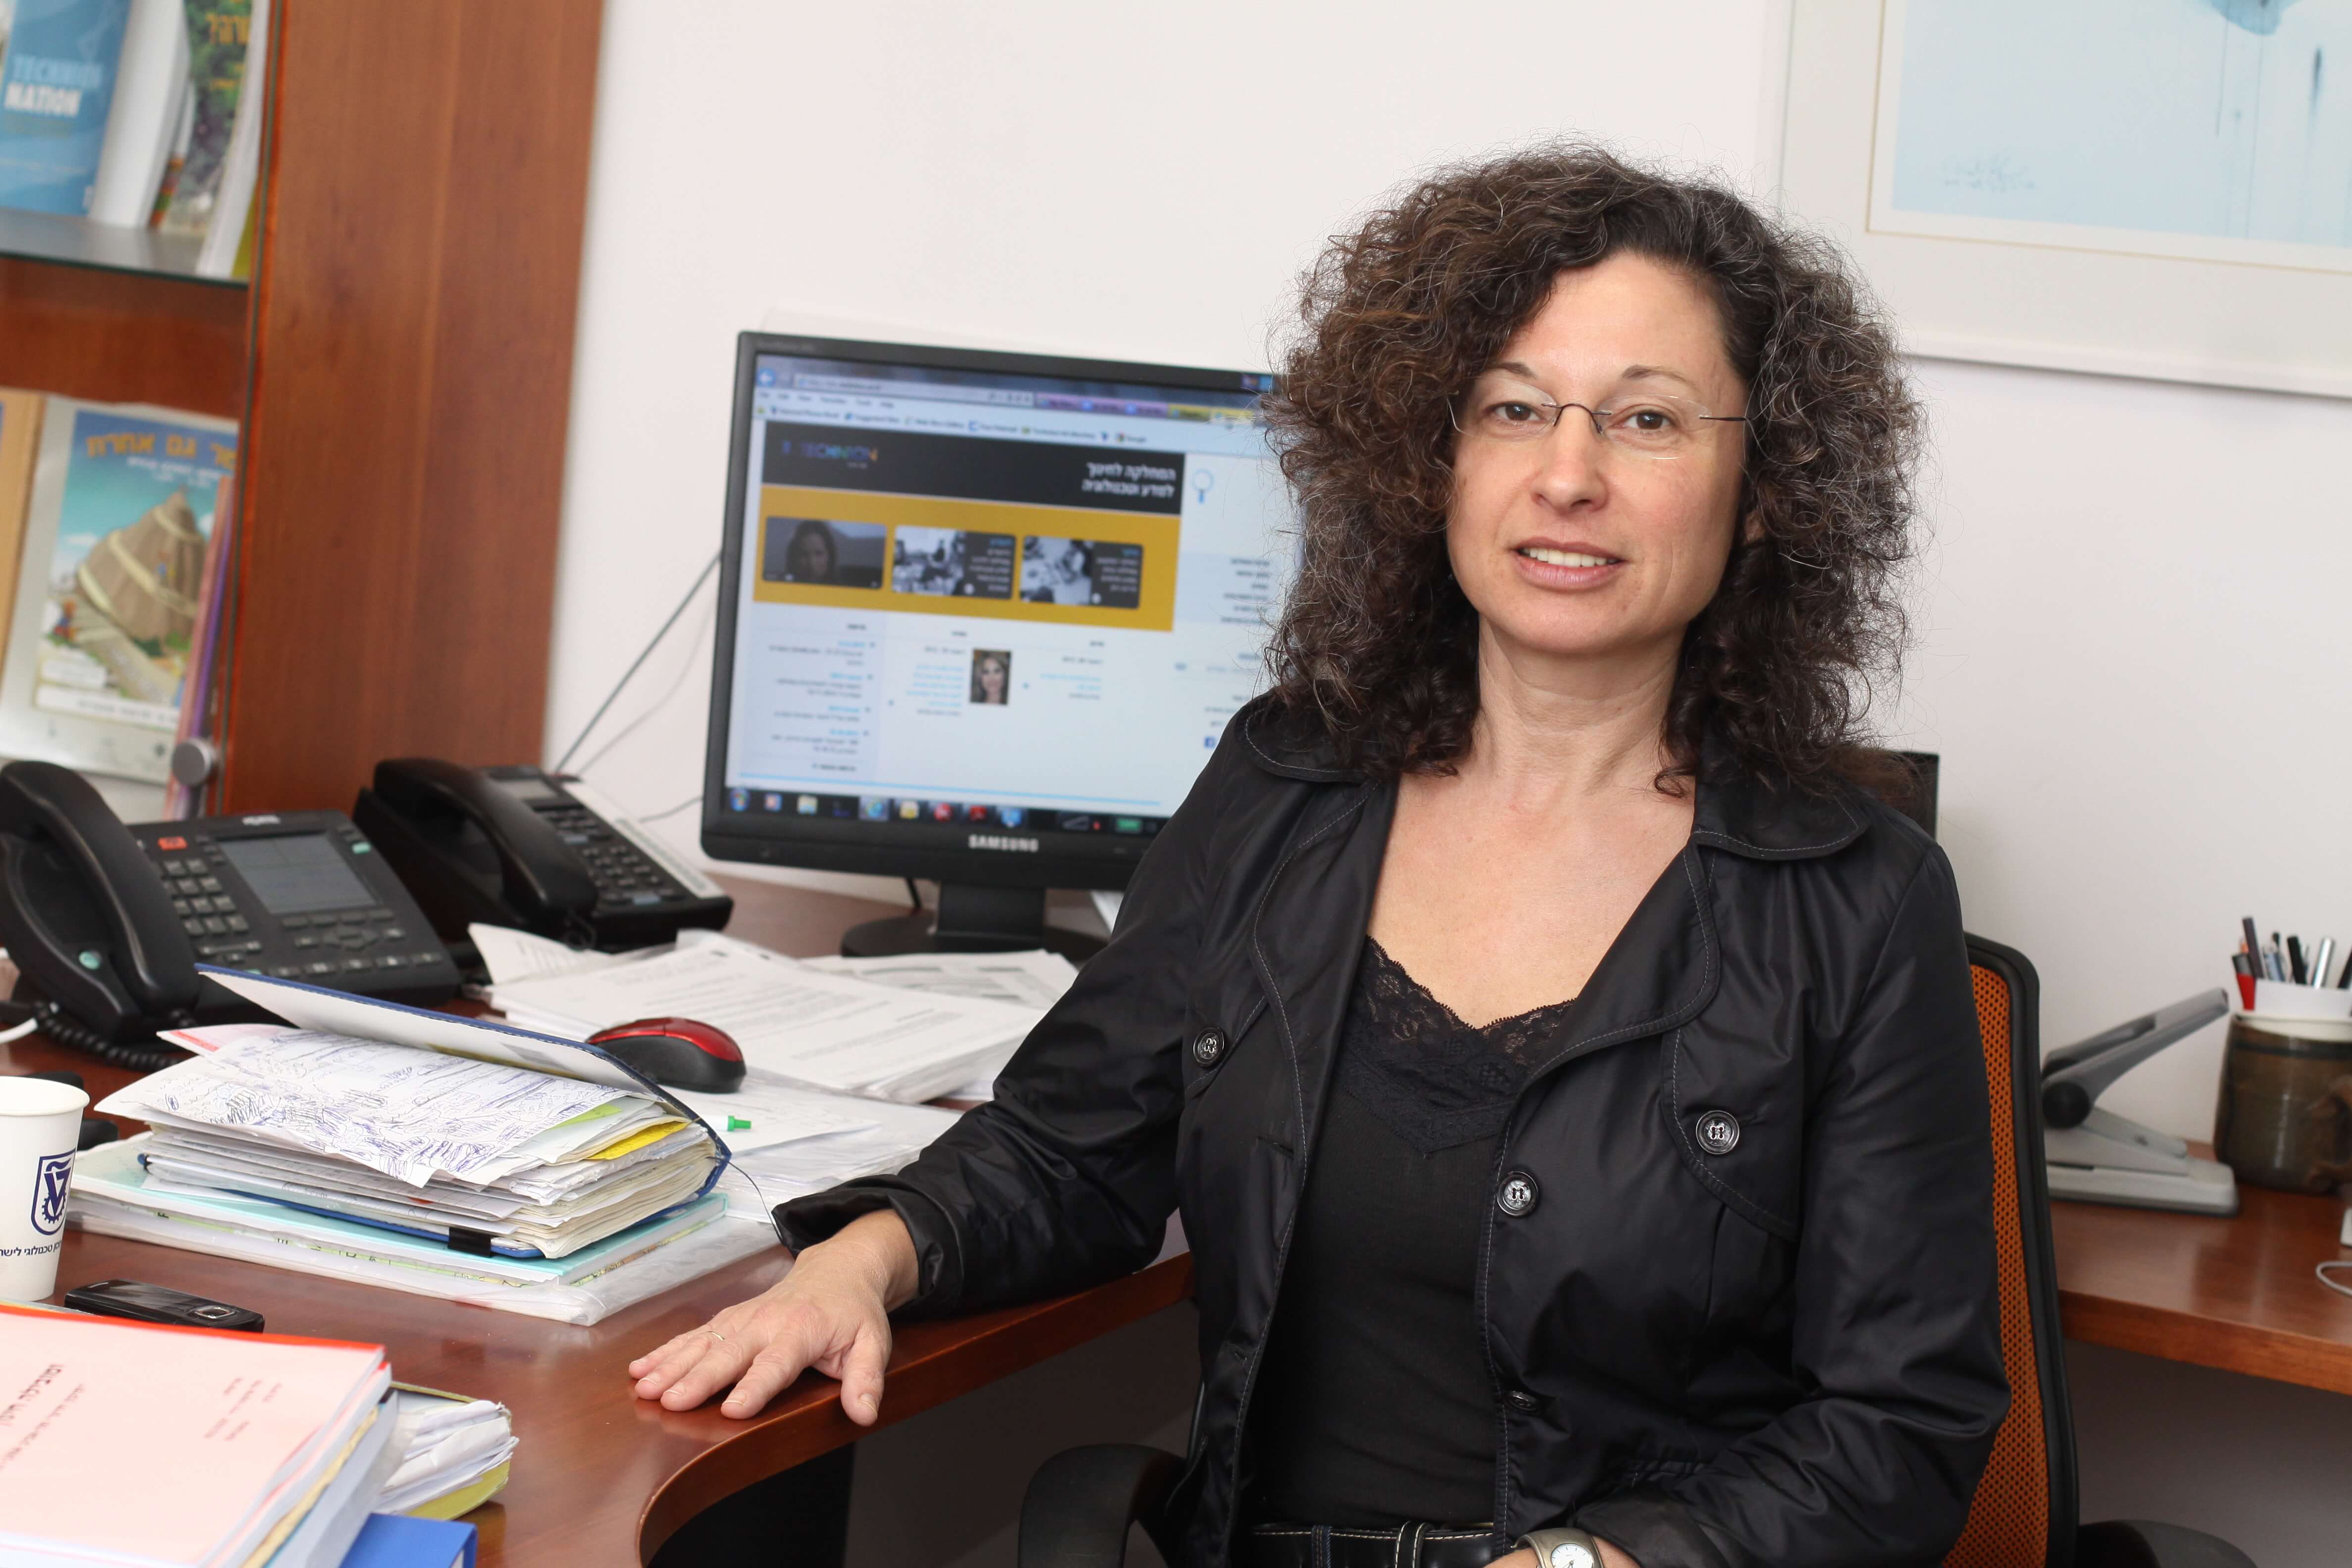 Prof. Orit Hazan, Dean of the Faculty of Science and Technology Education at the Technion. Photo: Technion spokespeople